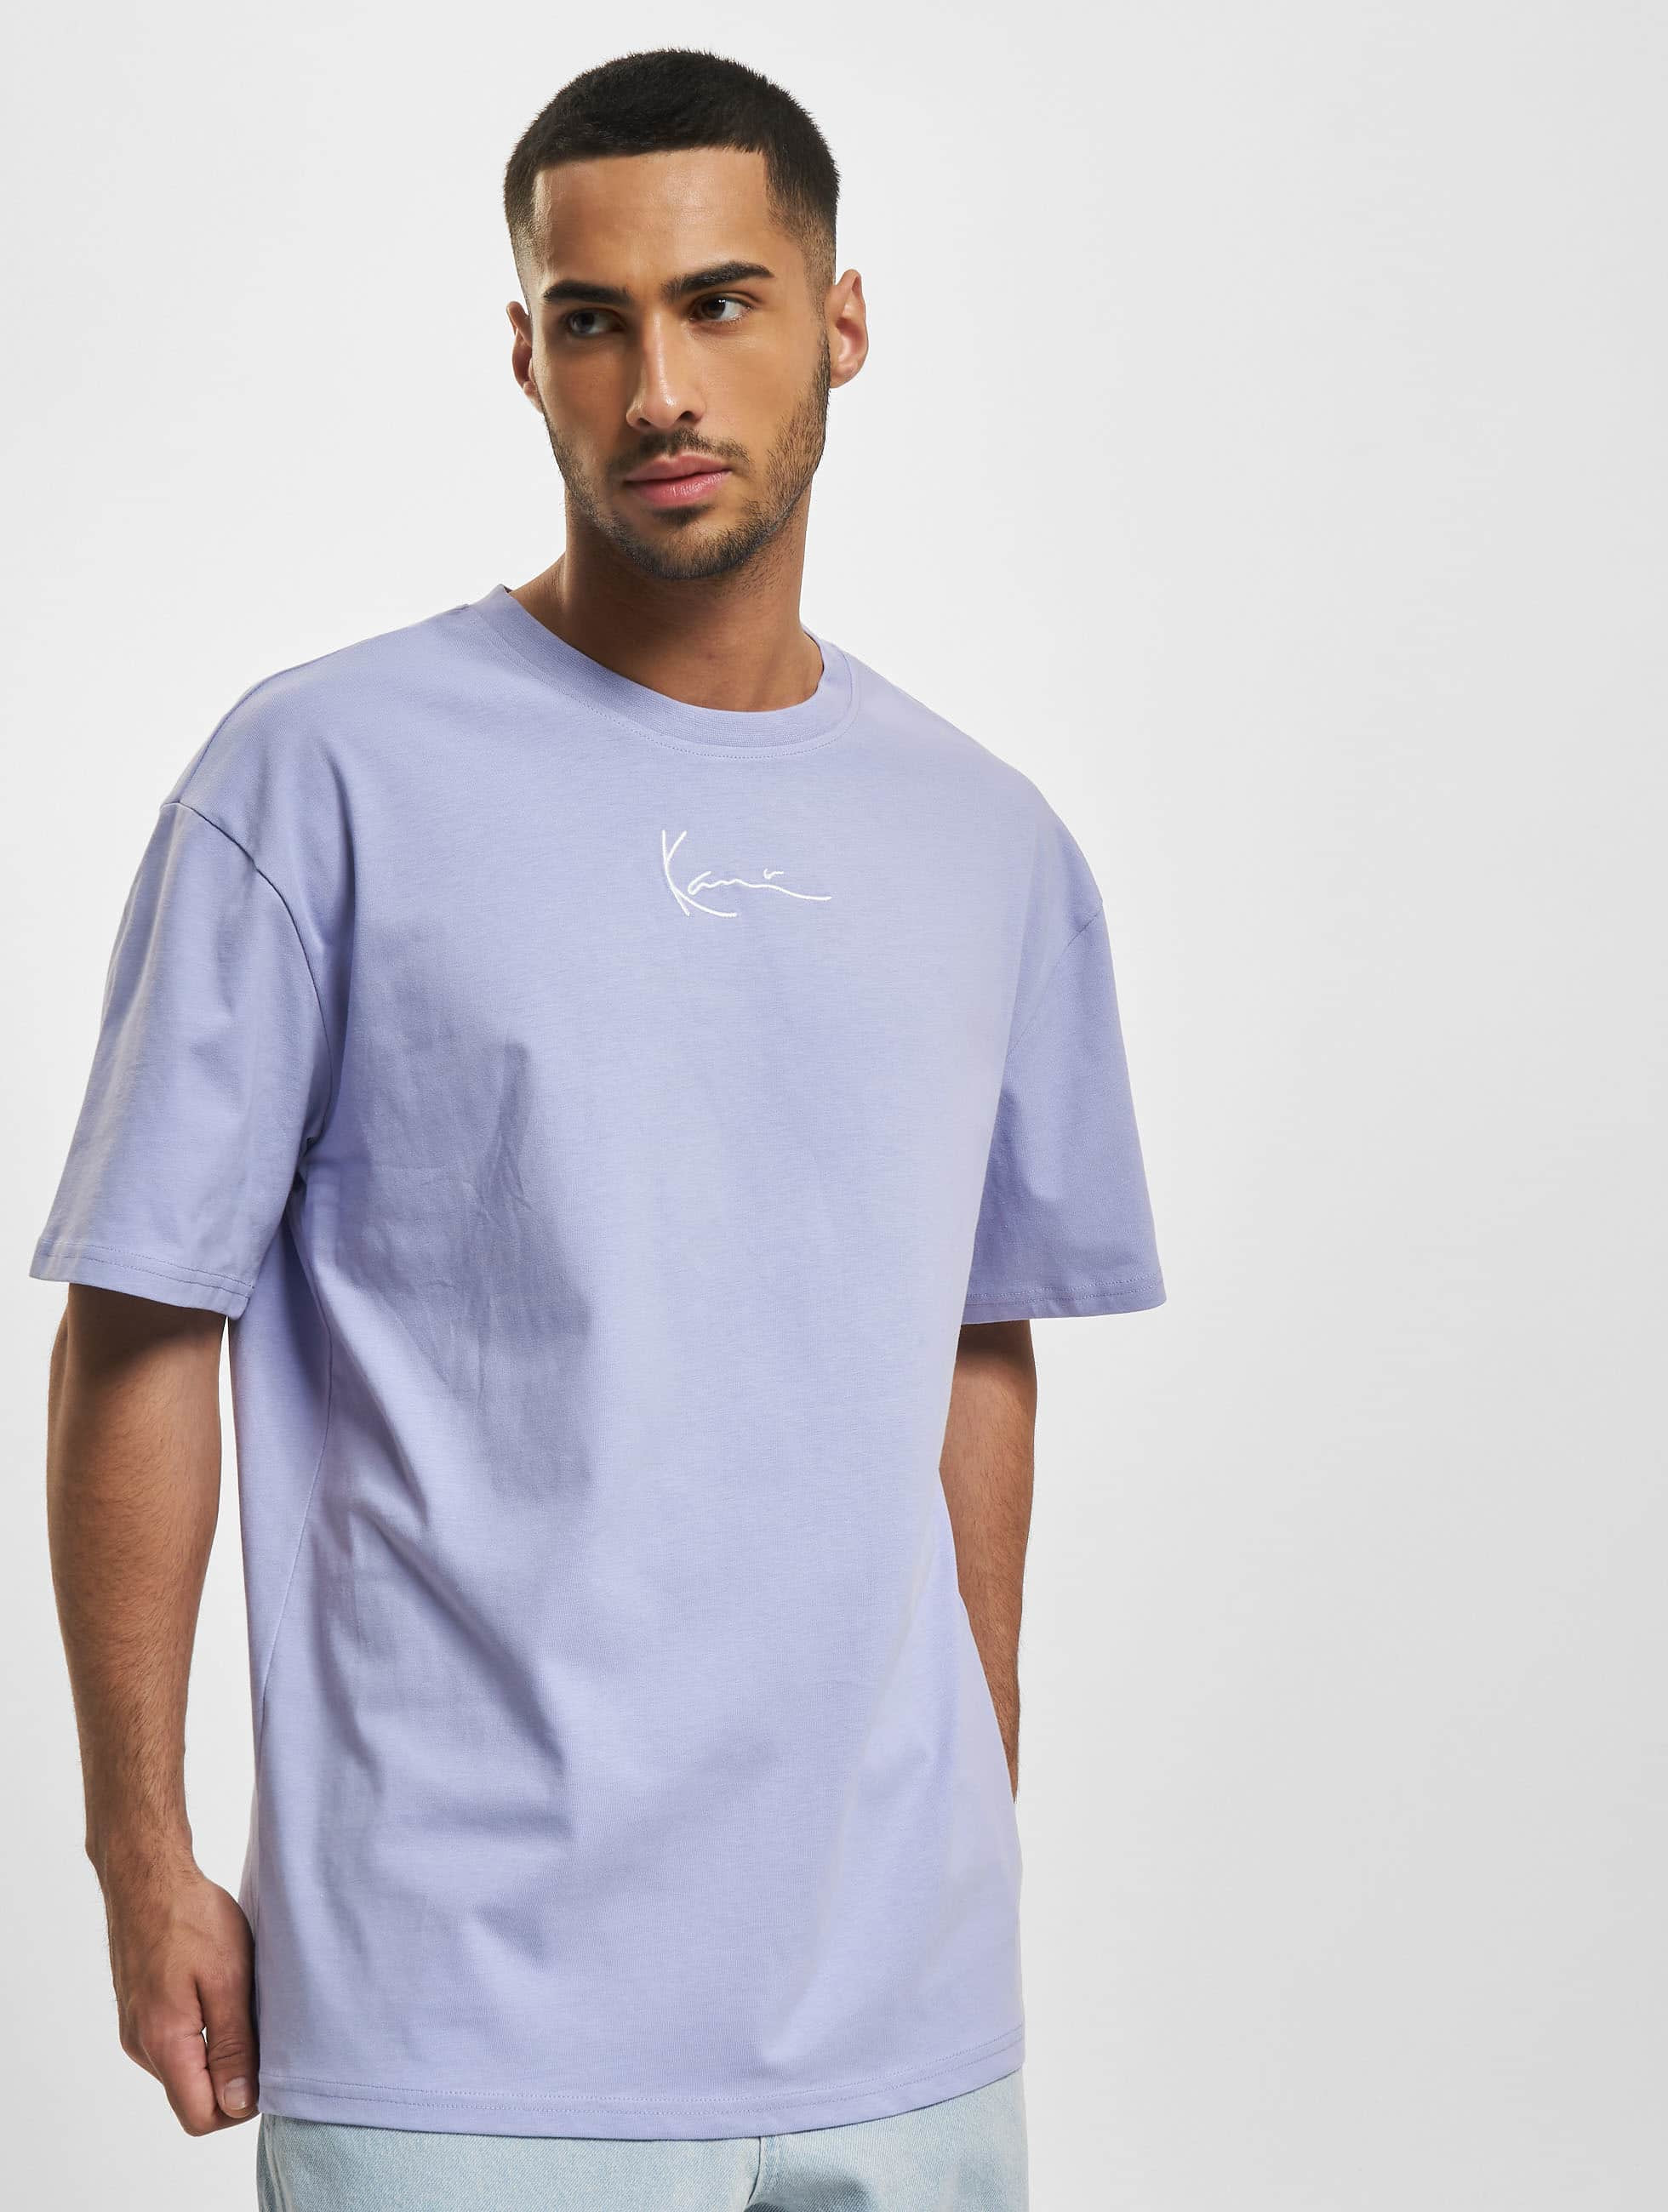 Karl Kani T-Shirt Small Signature Essential in violet 1001294